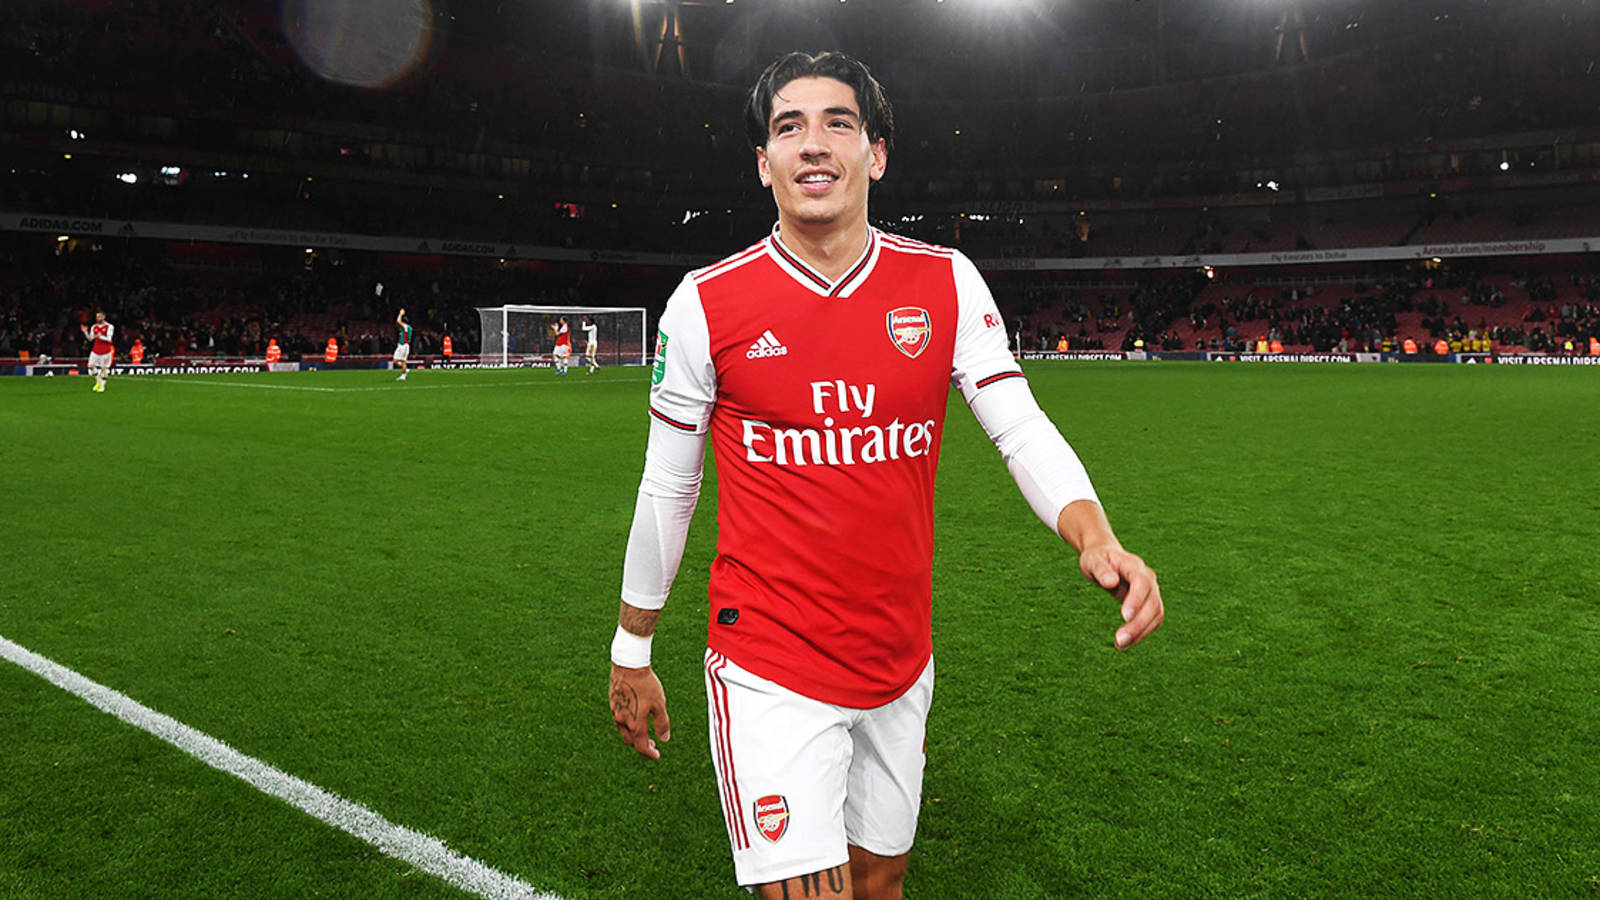 Bellerin Only a Third Option for Inter as Inzaghi Hopes to Replace Hakimi